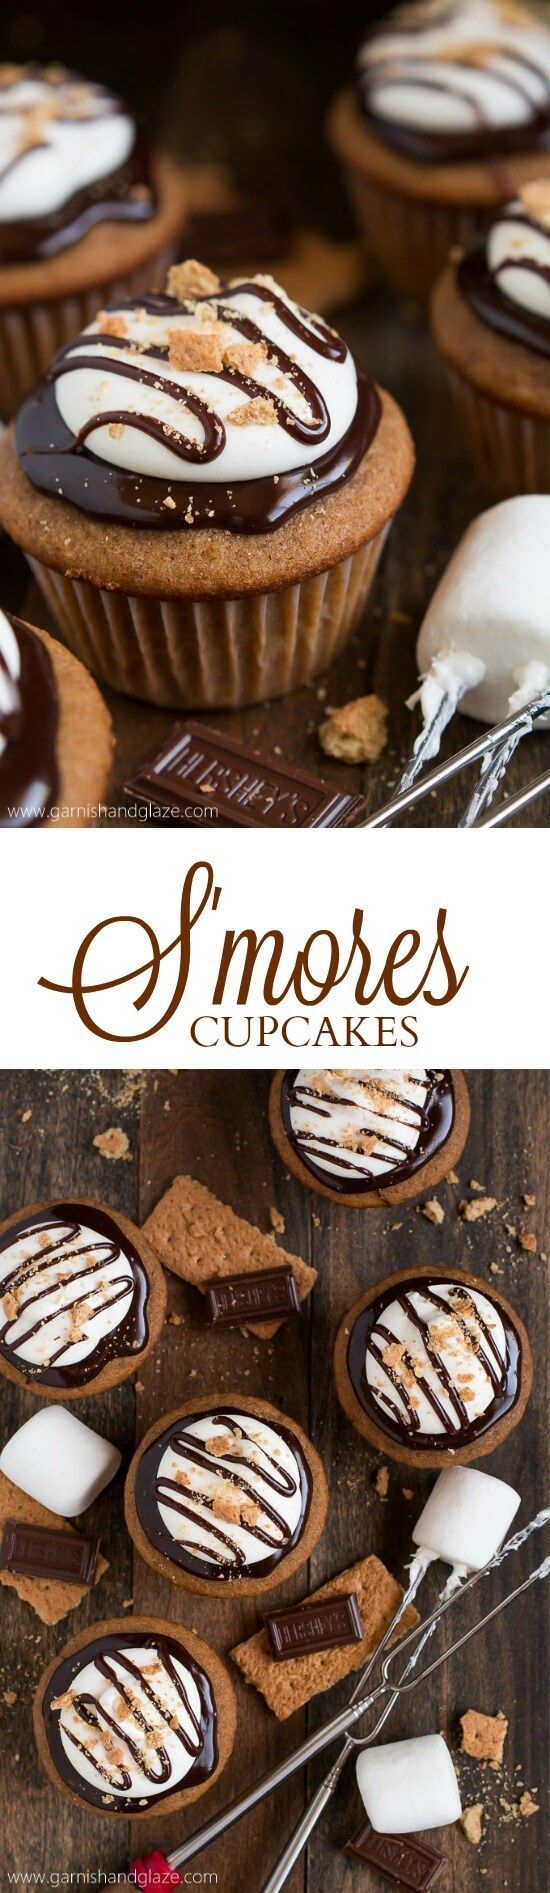 Celebrate National Smores Day with Smores Cupcakes that have milk chocolate ganache and fluffy marshmallow frosting on top of a